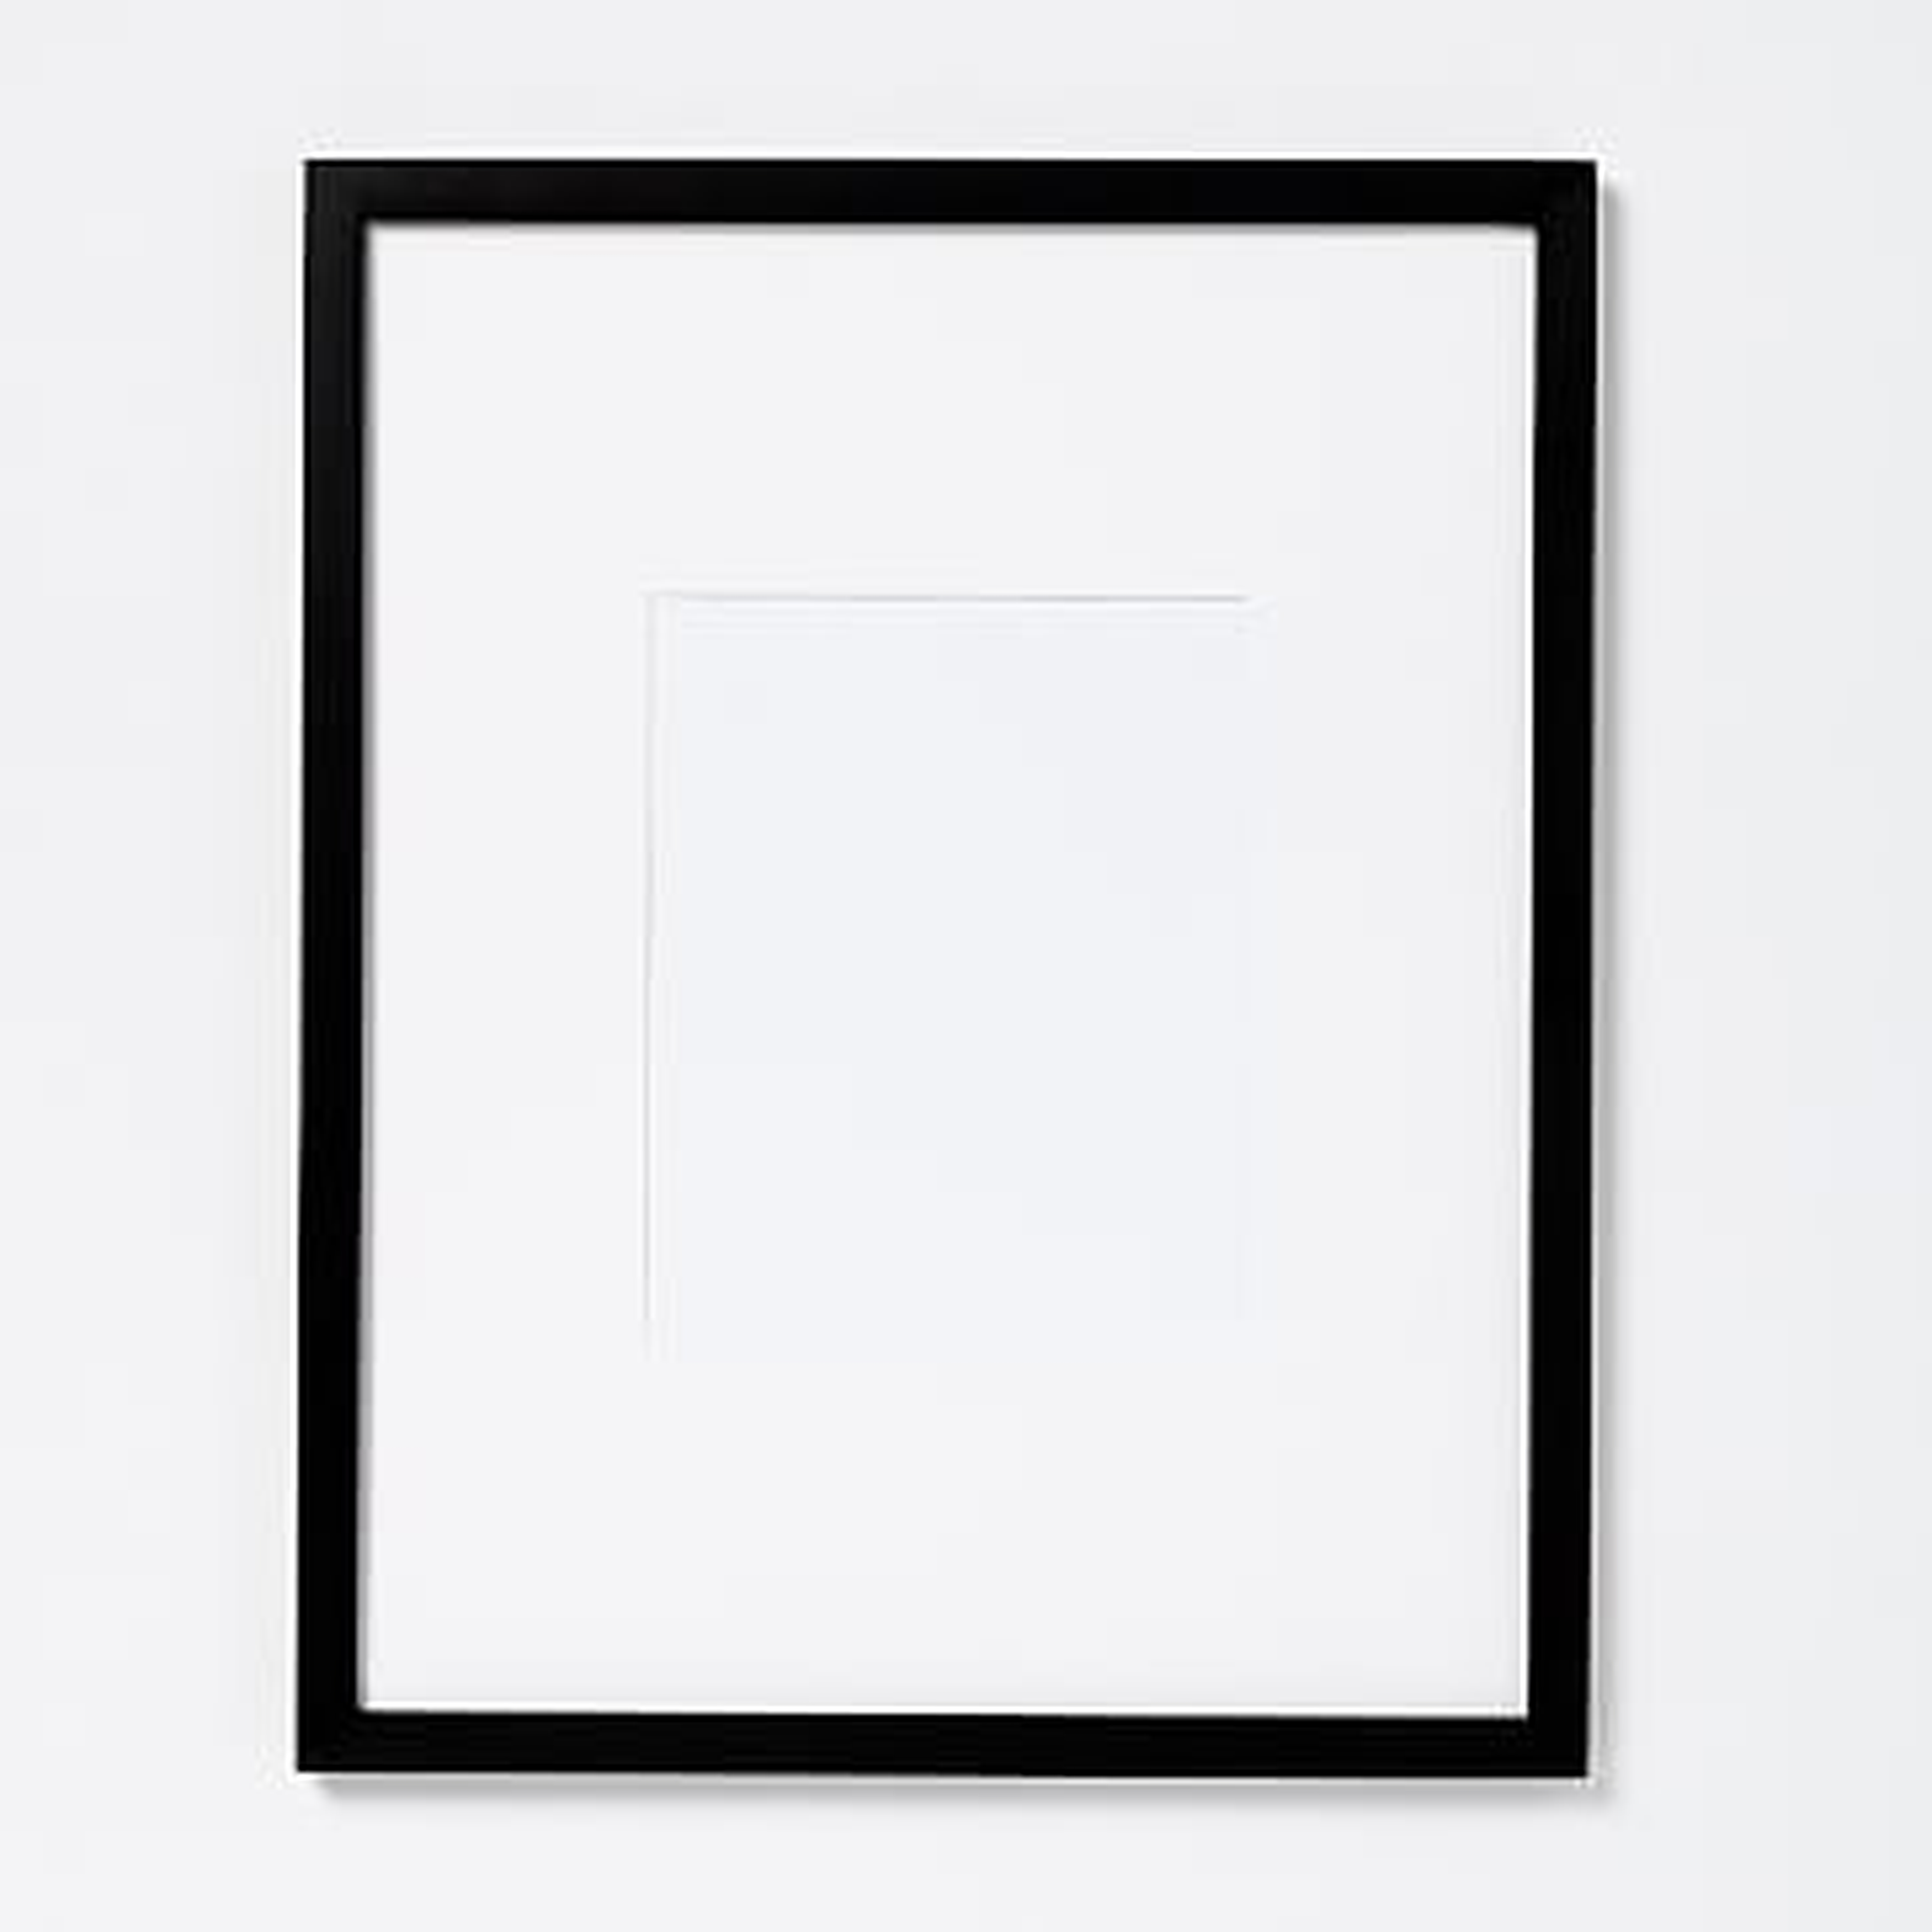 Gallery Frames, Black Lacquer, 8"x10" (15"x19" Frame) -Individual - West Elm